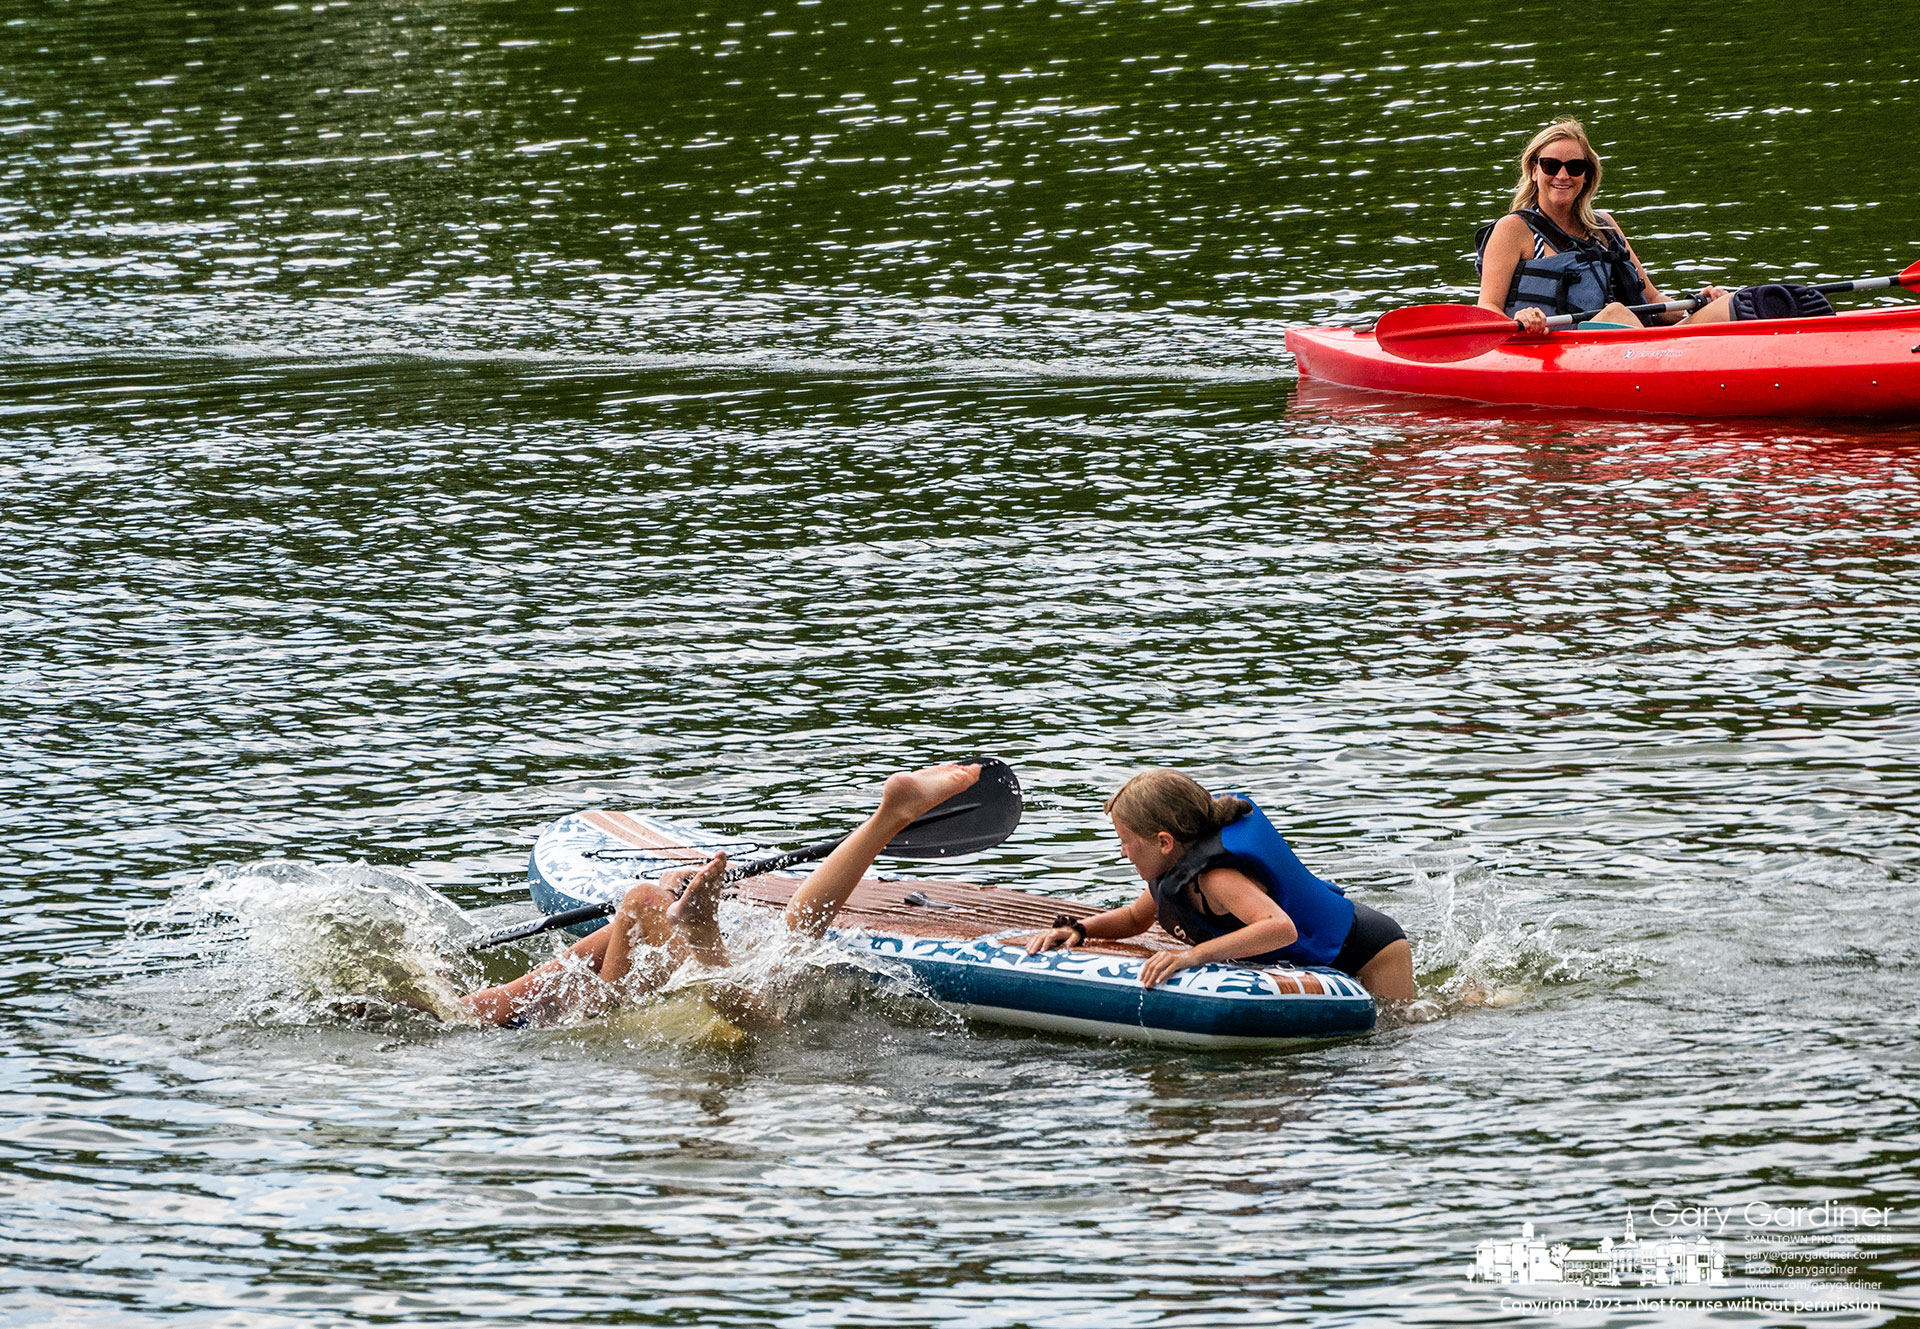 A trio of young girls take turns being the queen of the paddleboard before tossed into the waters of Hoover Reservoir near the Oxbow boat ramp. My Final Photo for July 23, 2023.